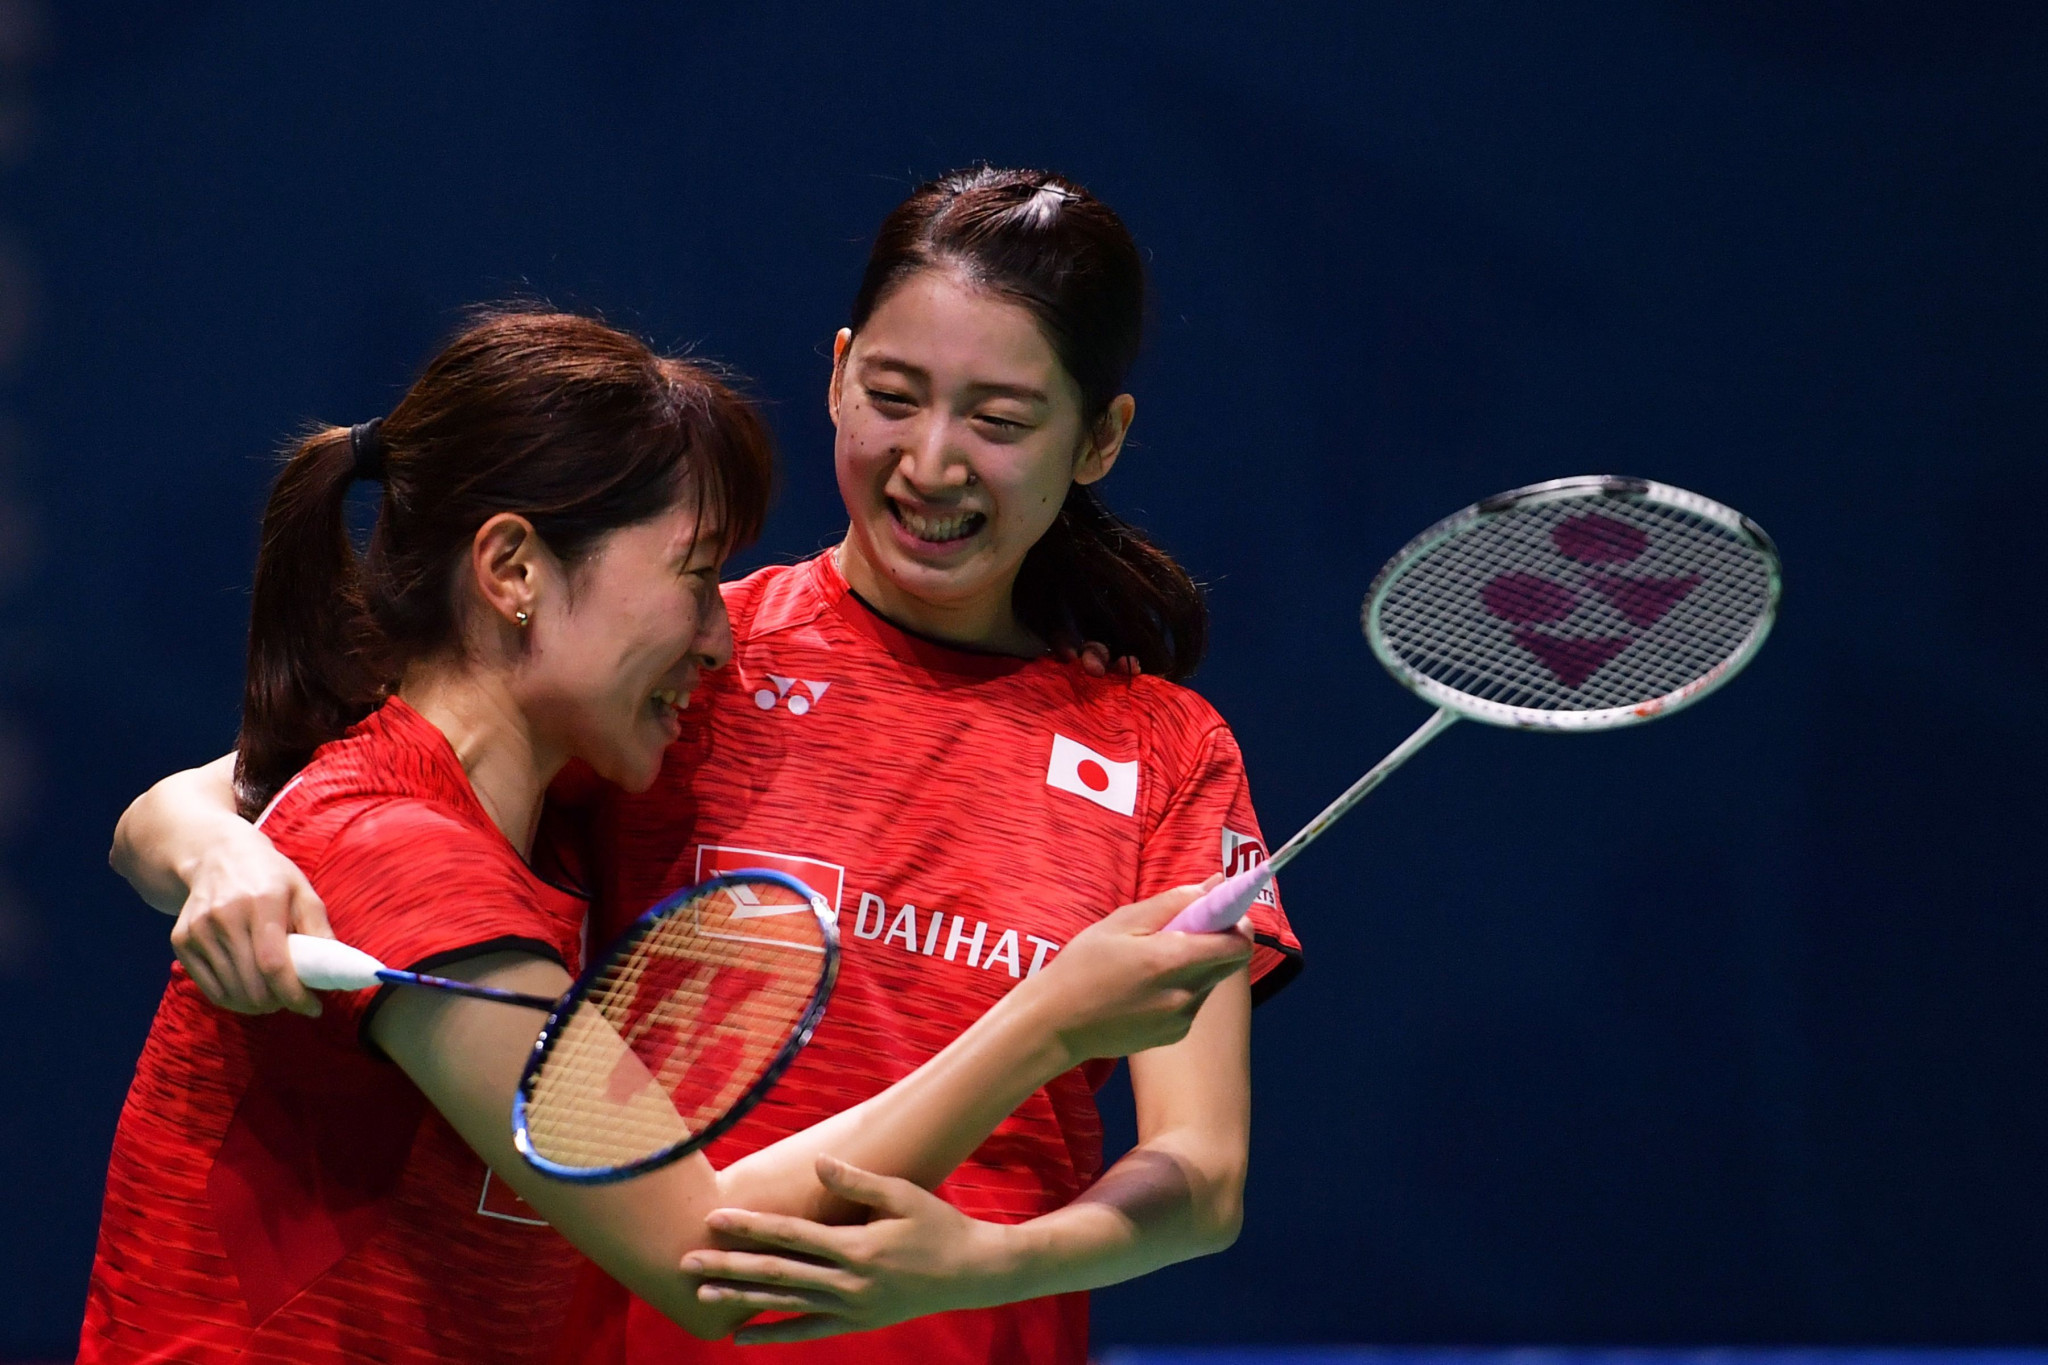 Koharu Yonemoto, left, and Shiho Tanaka won the BWF Super Series Finals women's doubles title in Dubai ©Getty Images